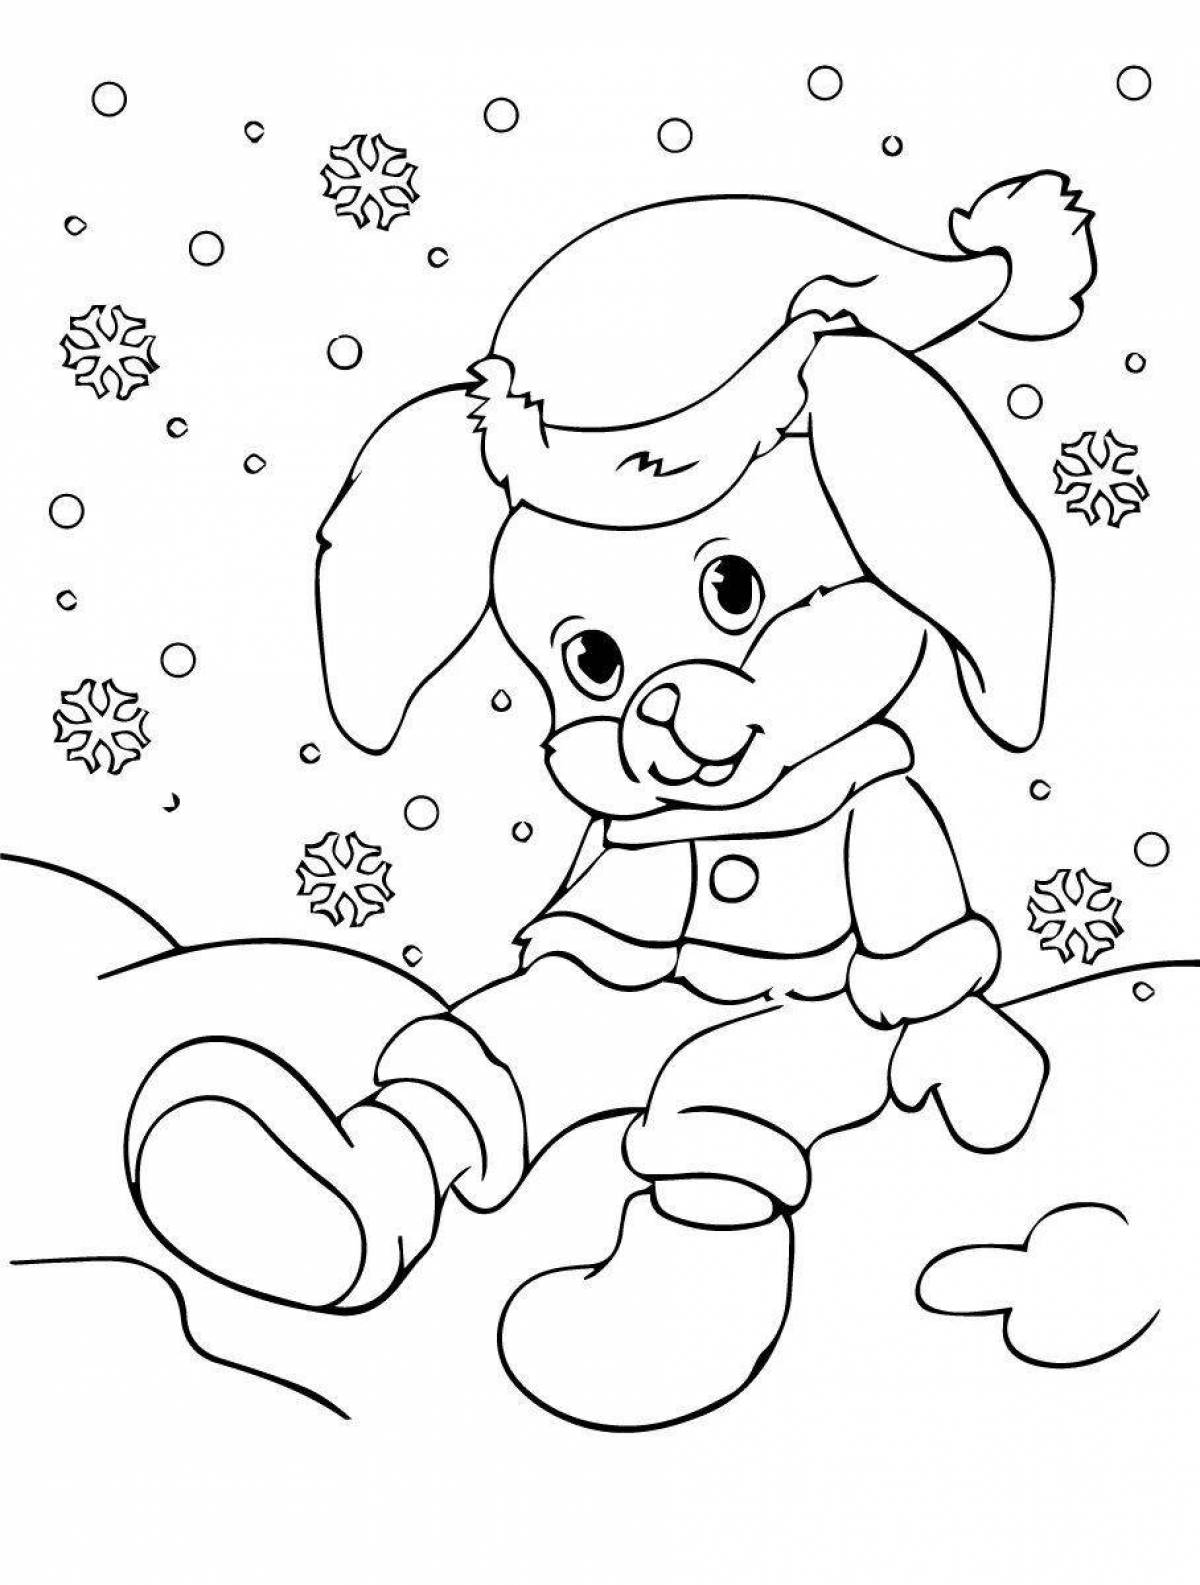 Playful coloring bunny new year